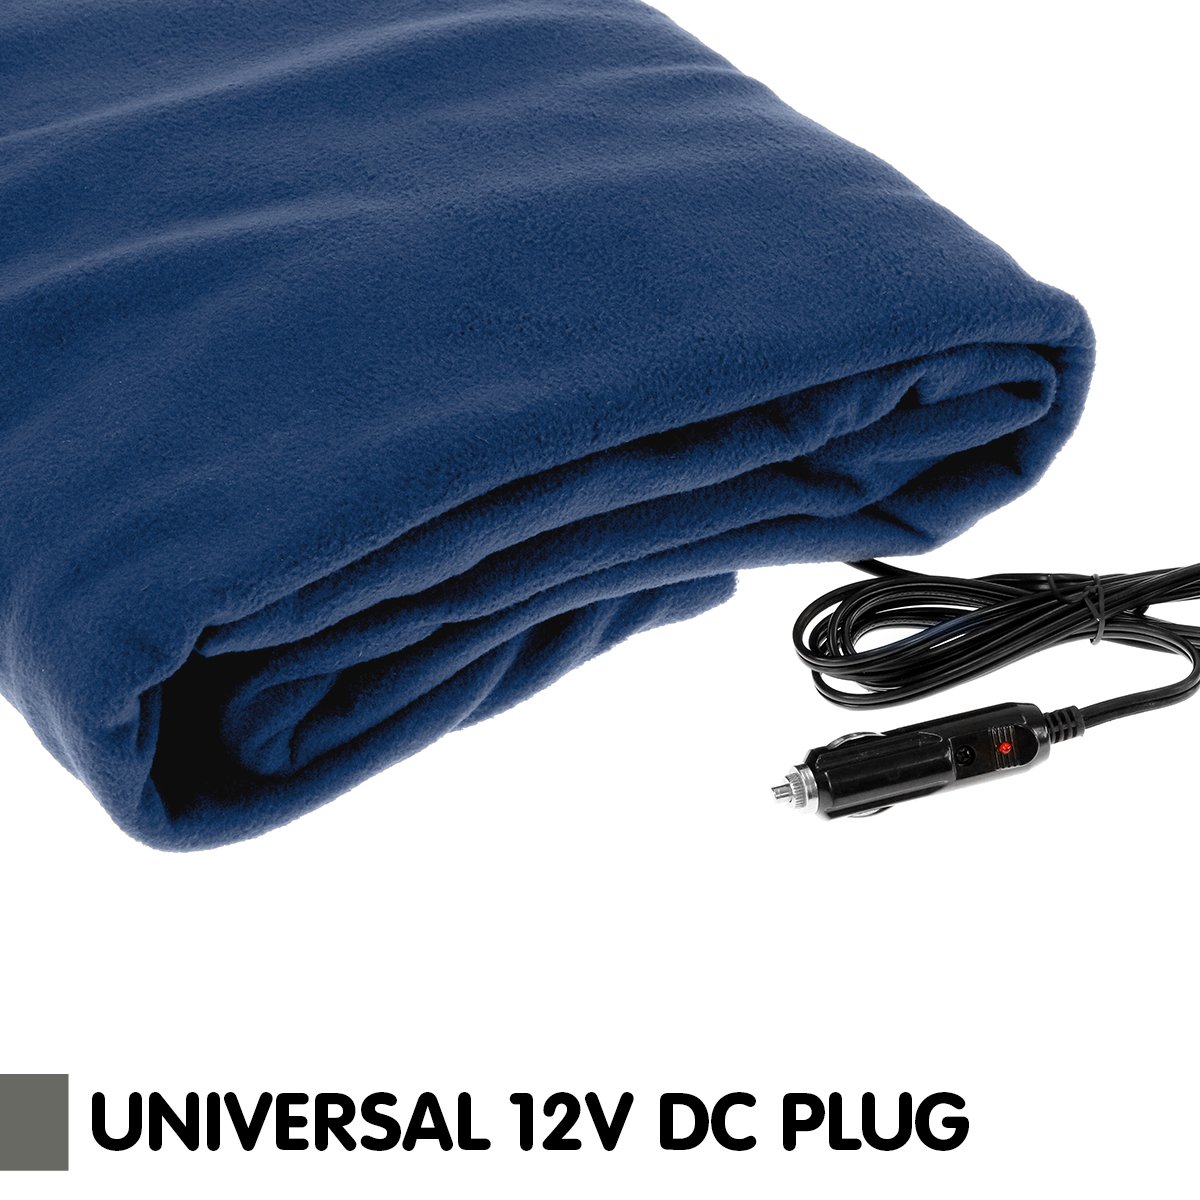 Laura Hill Heated Electric Car Blanket 150x110cm 12v - Navy Blue-Electric Throw Blanket-PEROZ Accessories